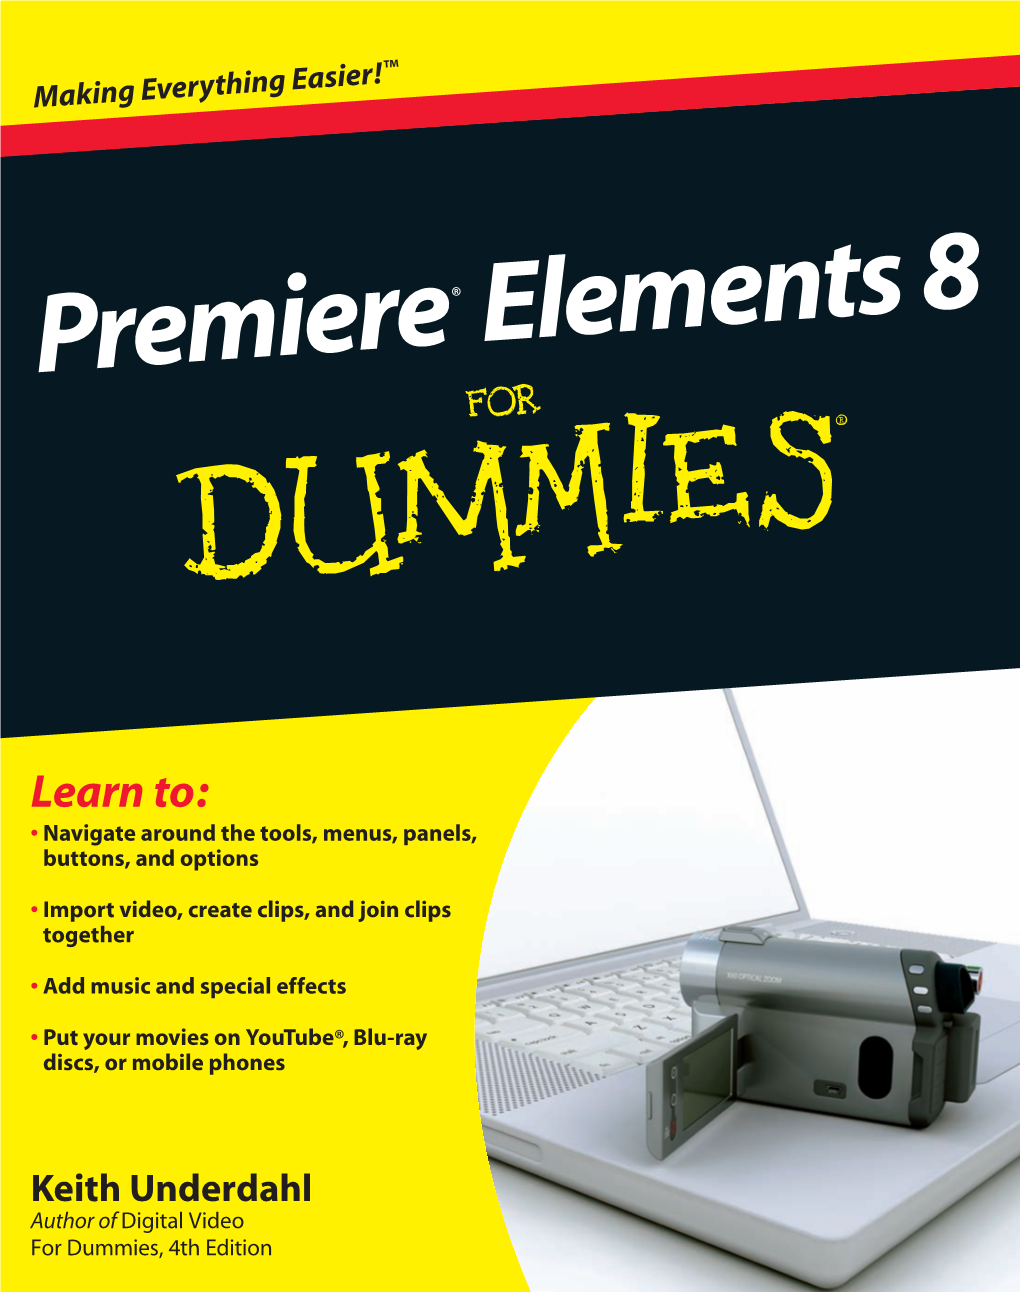 Premiere® Elements 8 for Dummies® Published by Wiley Publishing, Inc